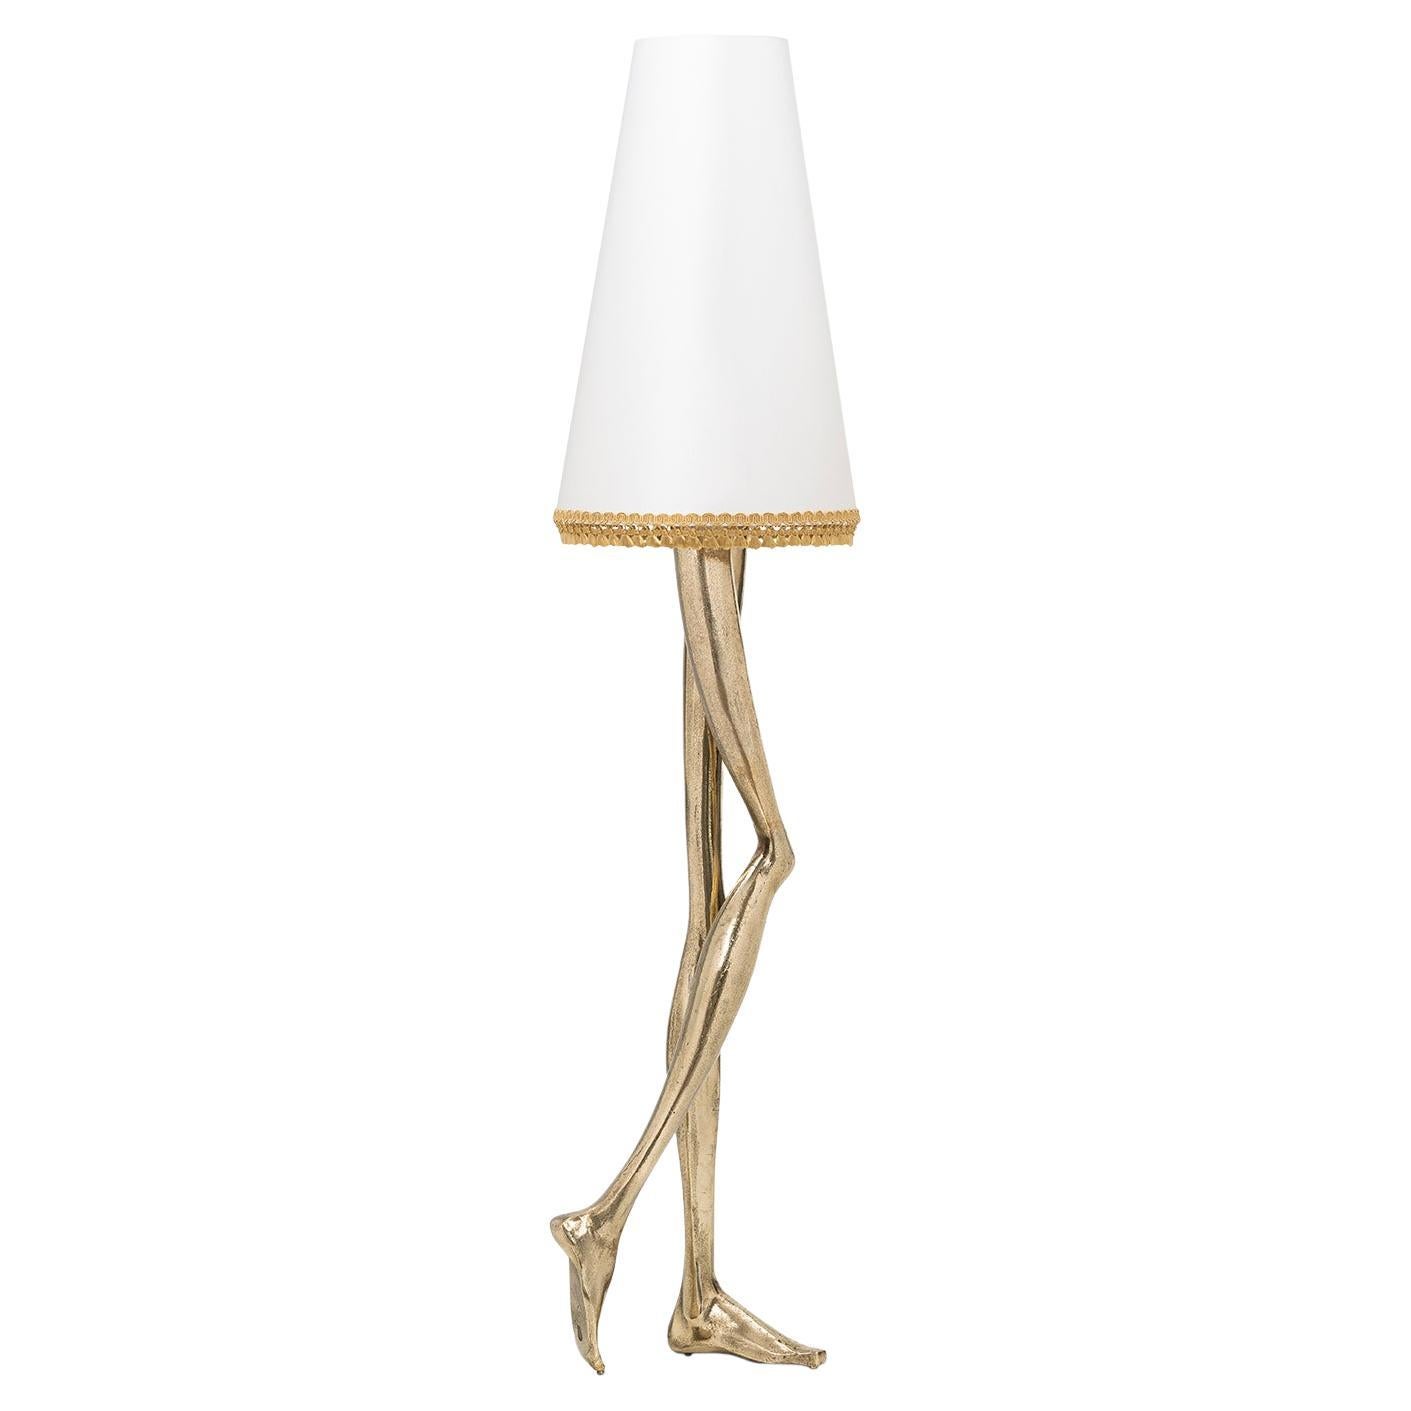 Contemporary Monroe Floor Lamp, Textured Brass Cast and an off White Lampshade